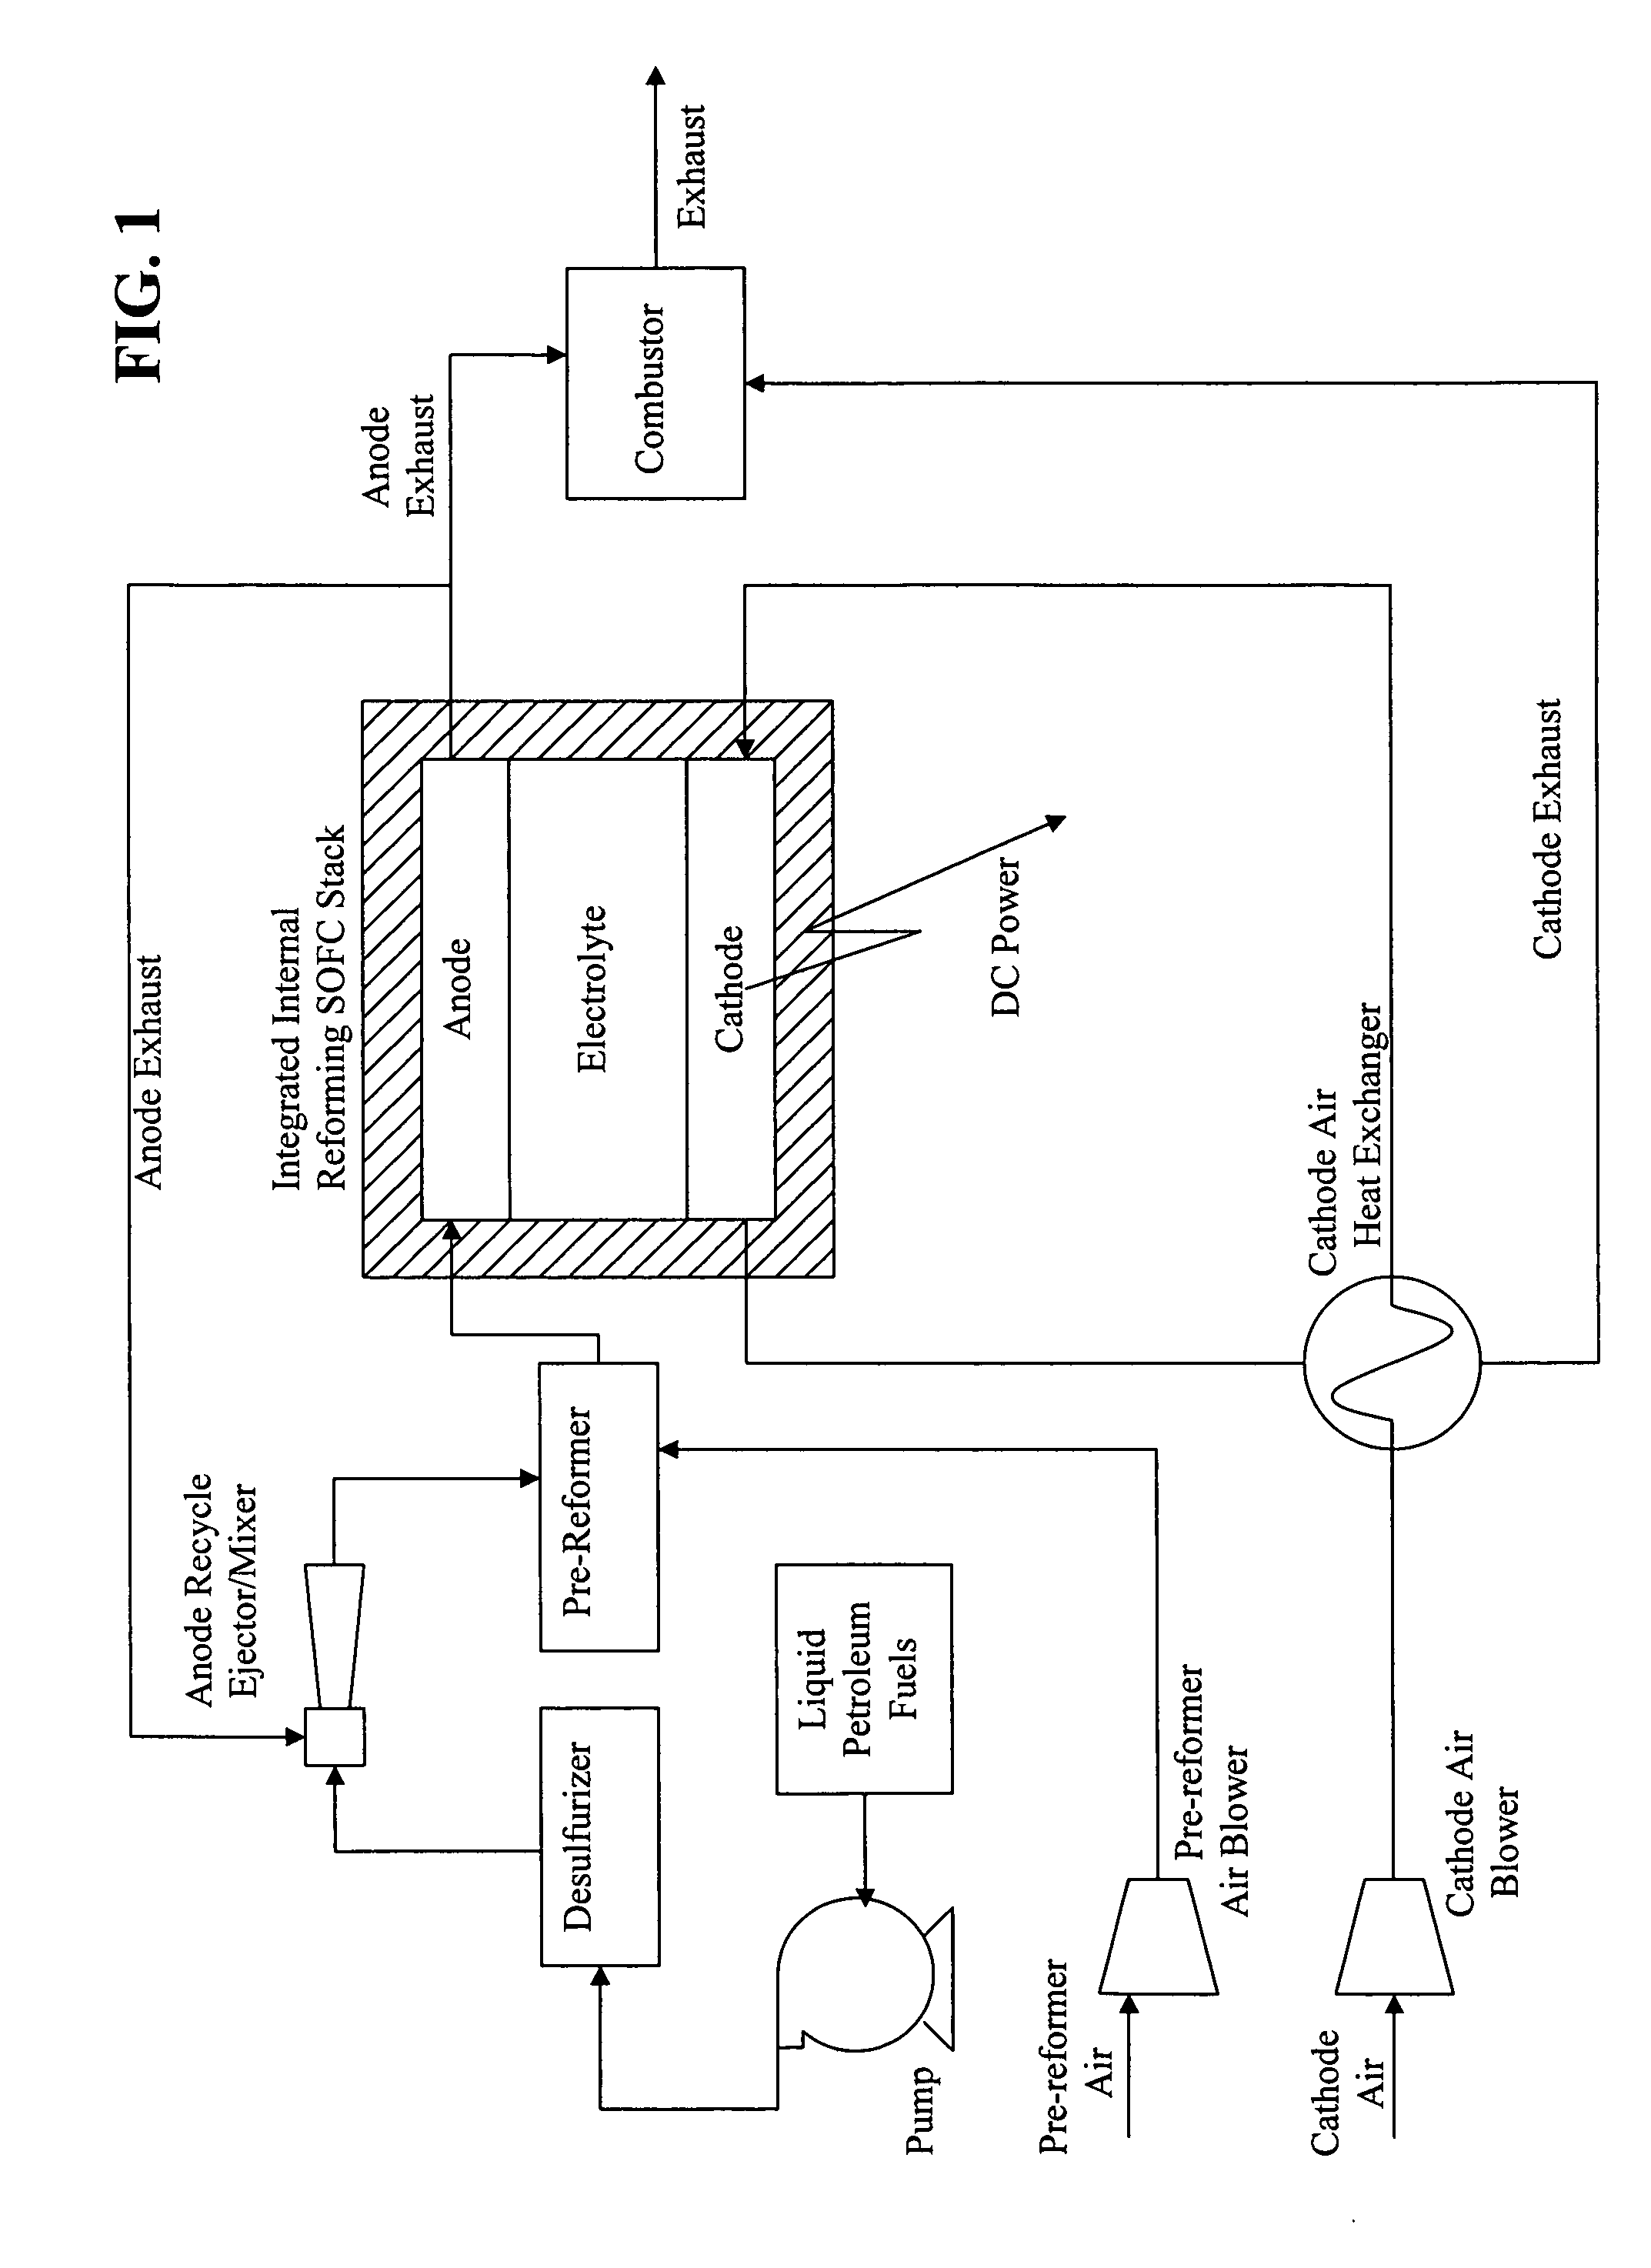 Process for the conversion of oil-based liquid fuels to a fuel mixture suitable for use in solid oxide fuel cell applications